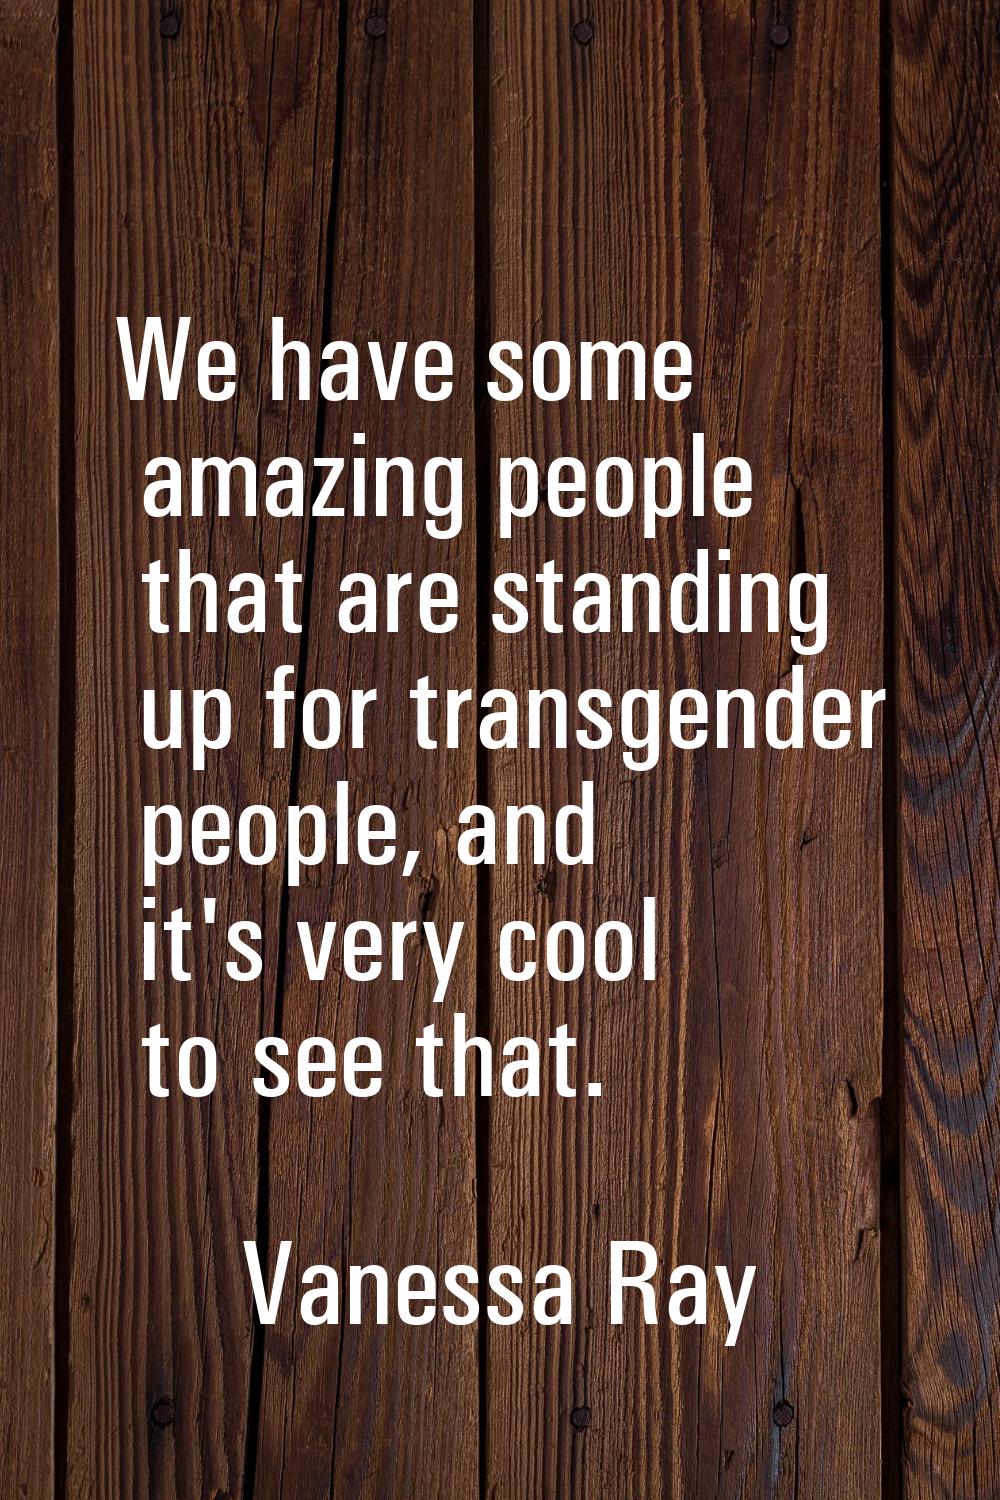 We have some amazing people that are standing up for transgender people, and it's very cool to see 